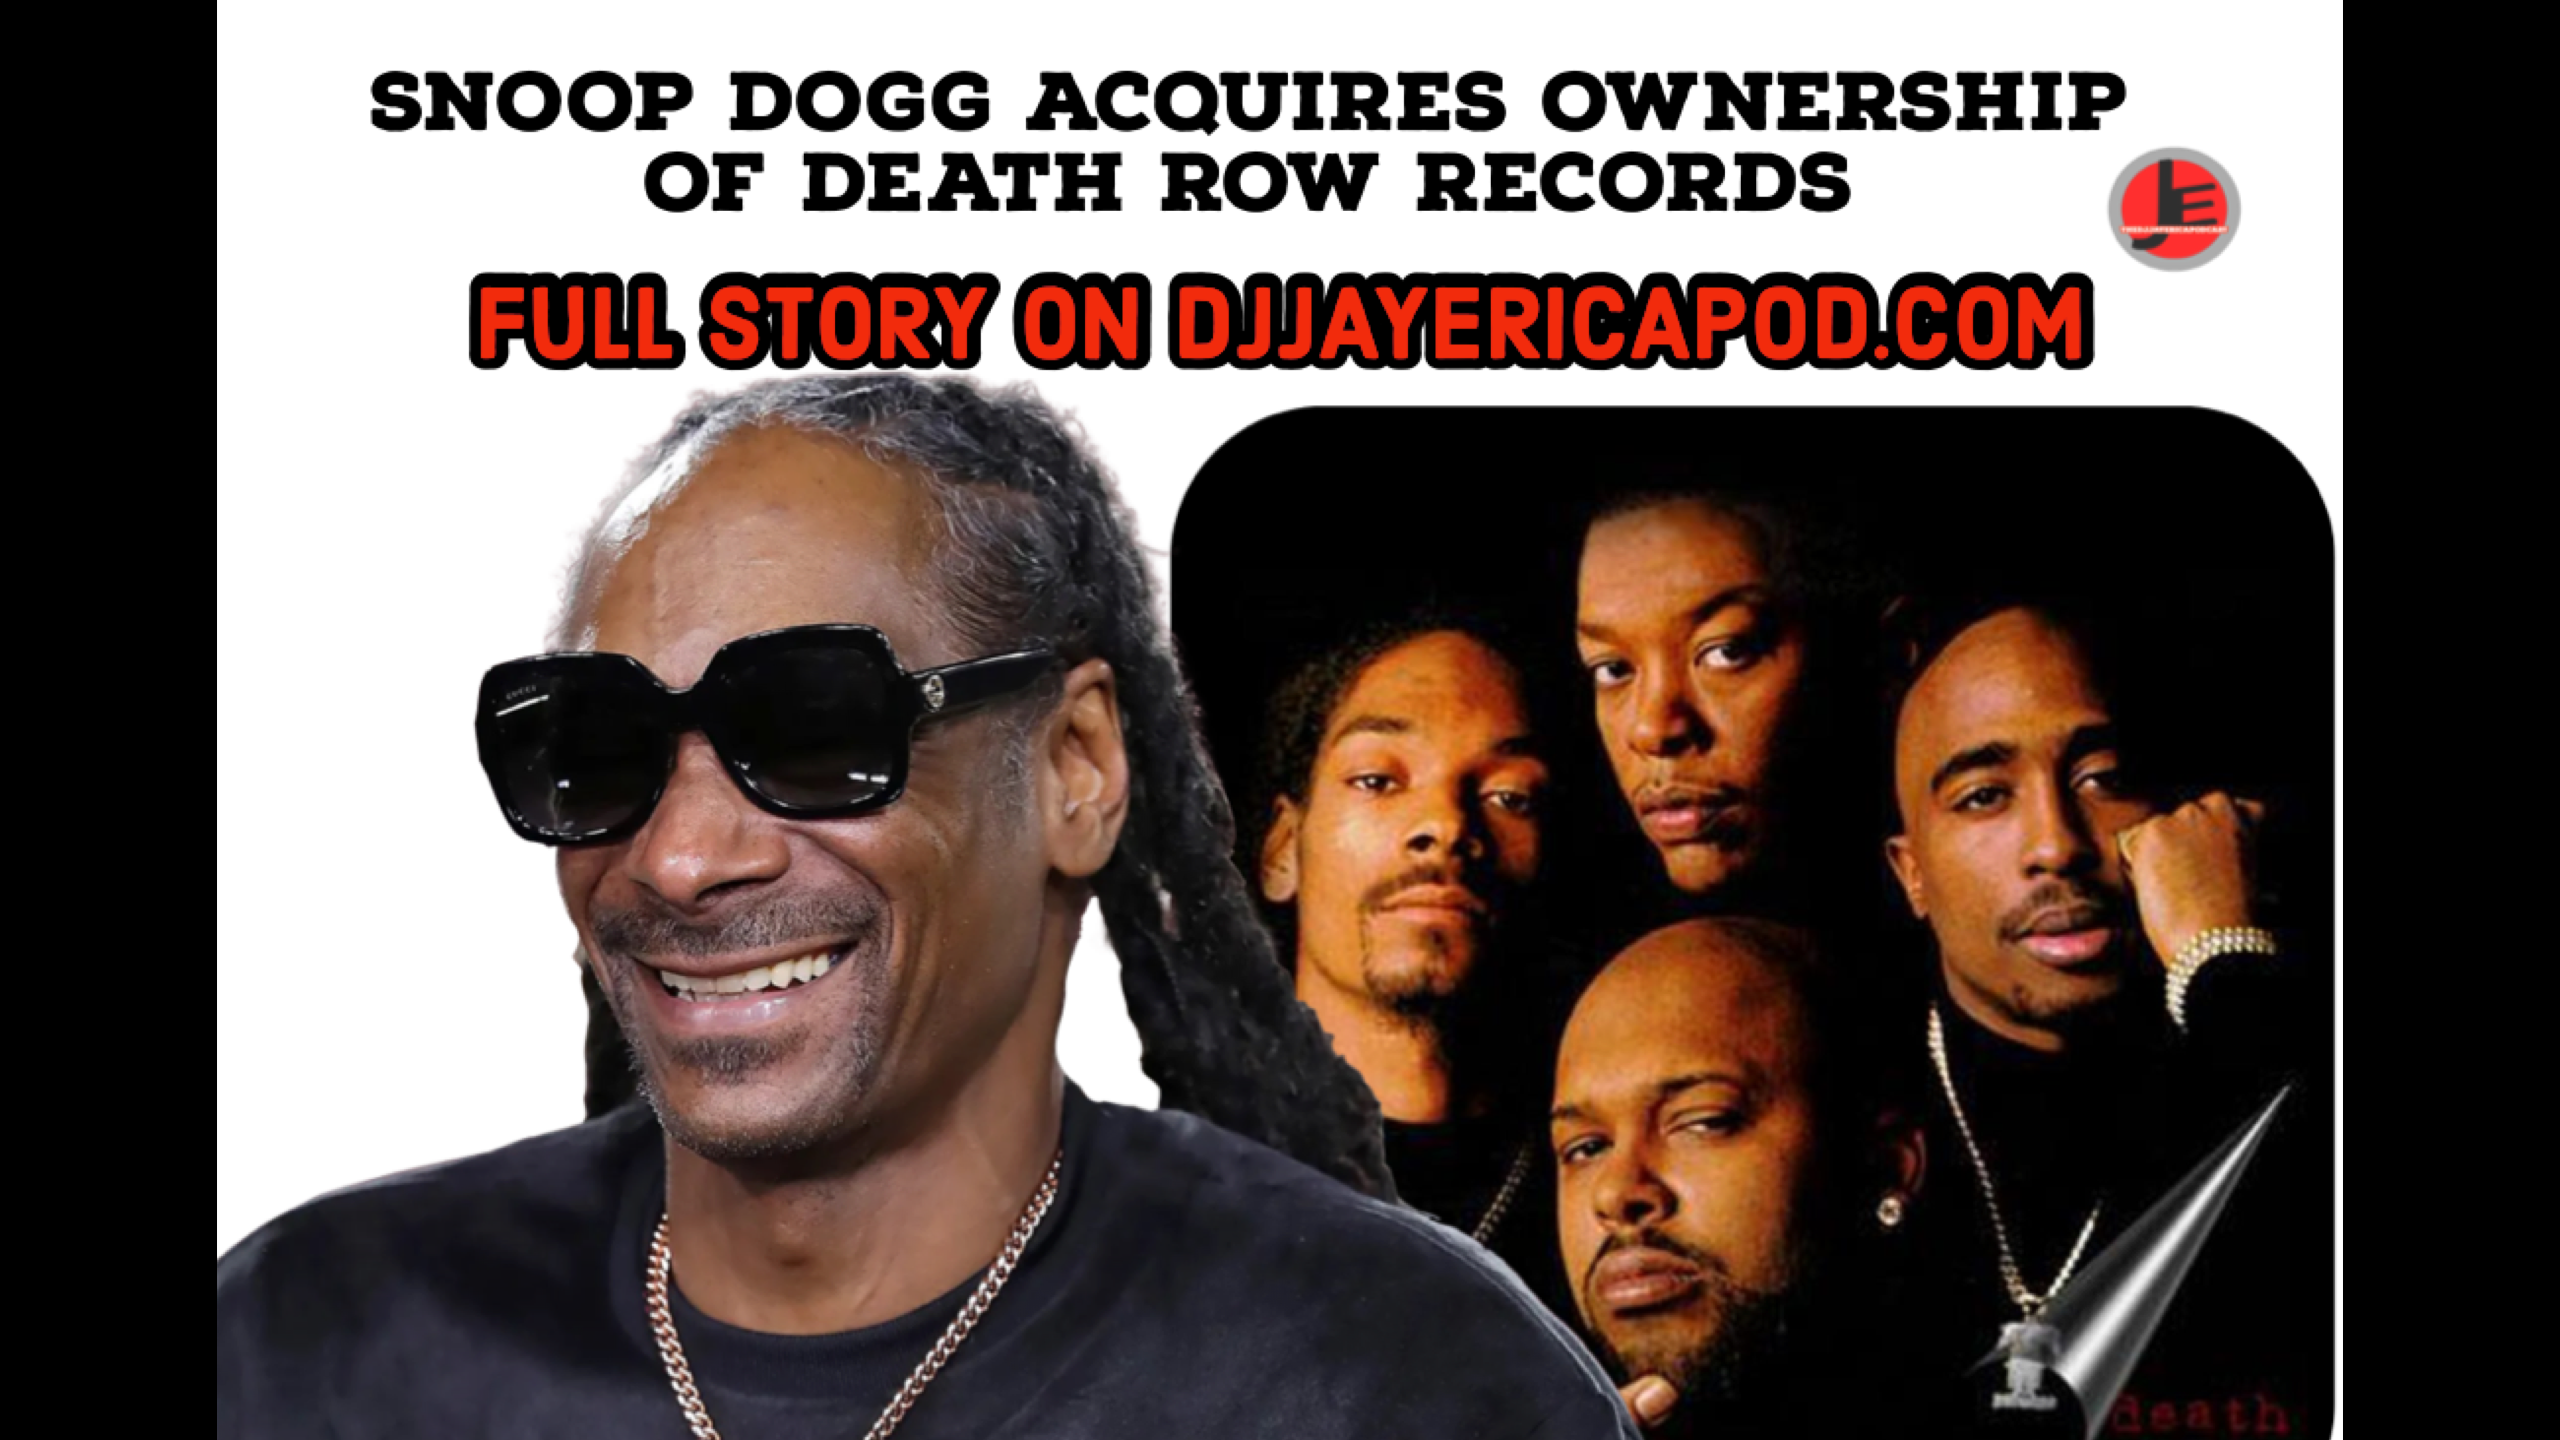 Snoop Dogg Acquires Ownership of Death Row Records